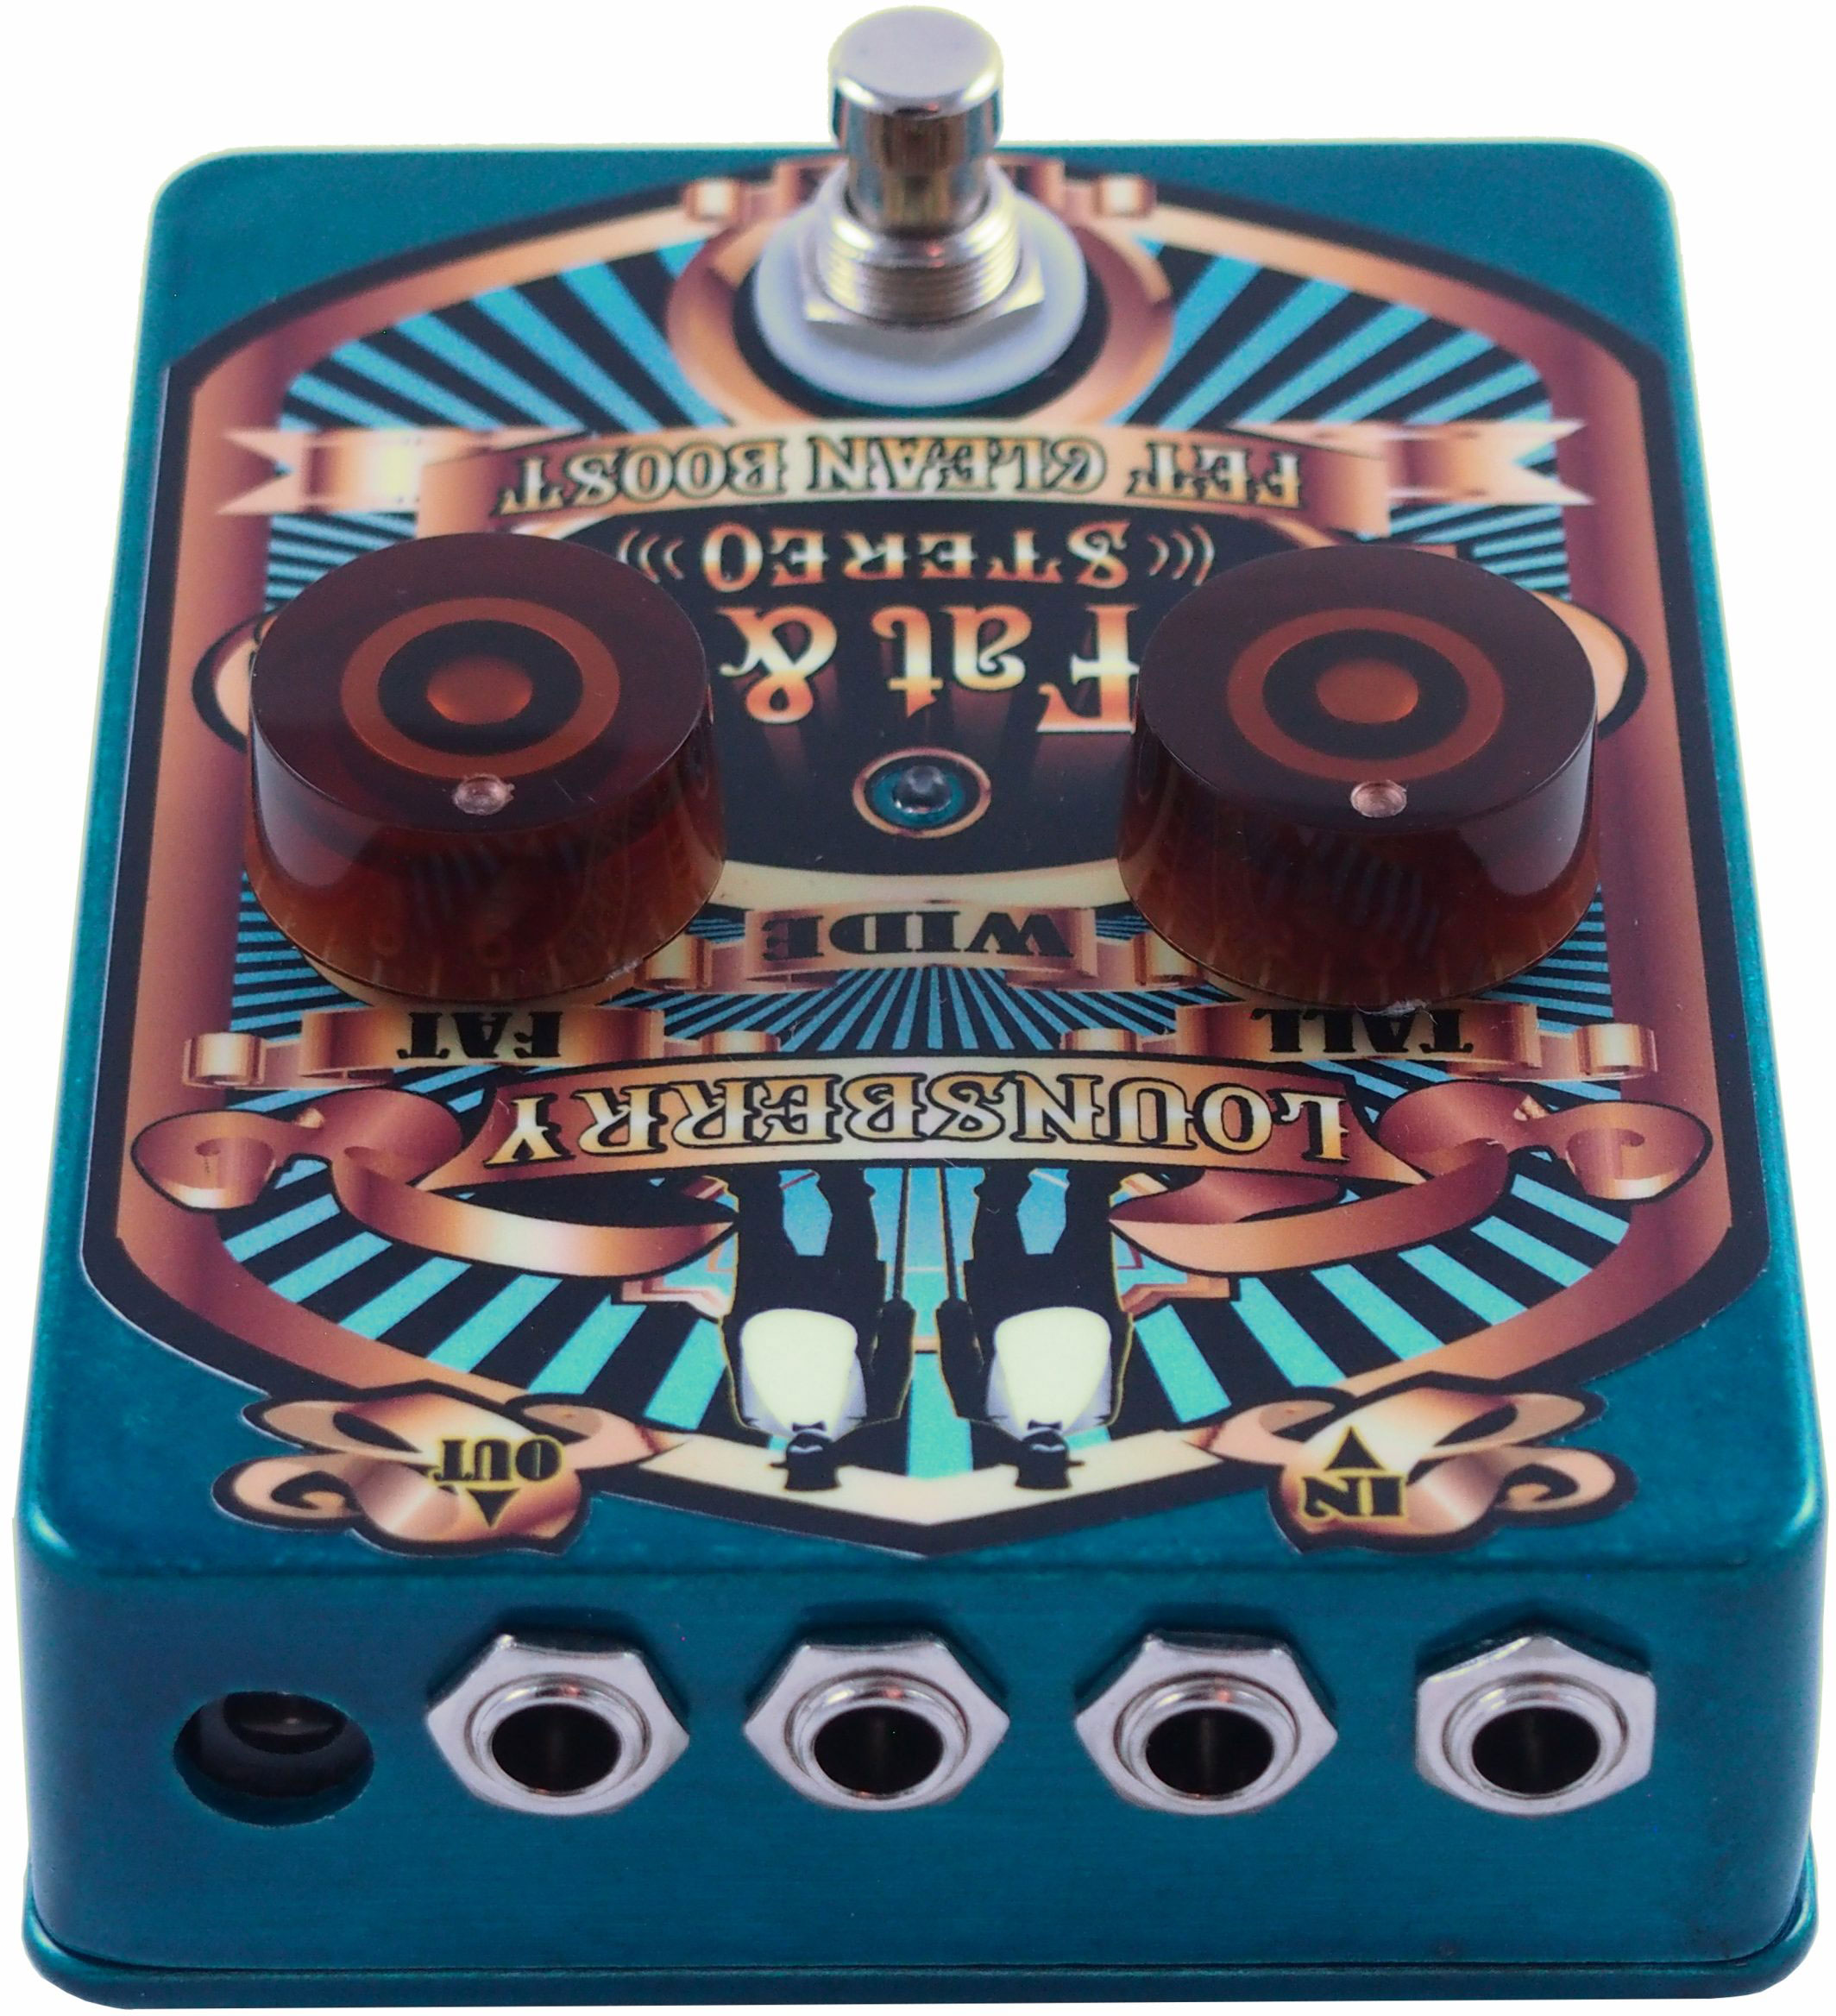 Lounsberry Pedals Tfw-1 Tall & Fat Wide Clean Boost Keyboard Standard - Onderdelen synth & keyboard - Variation 2